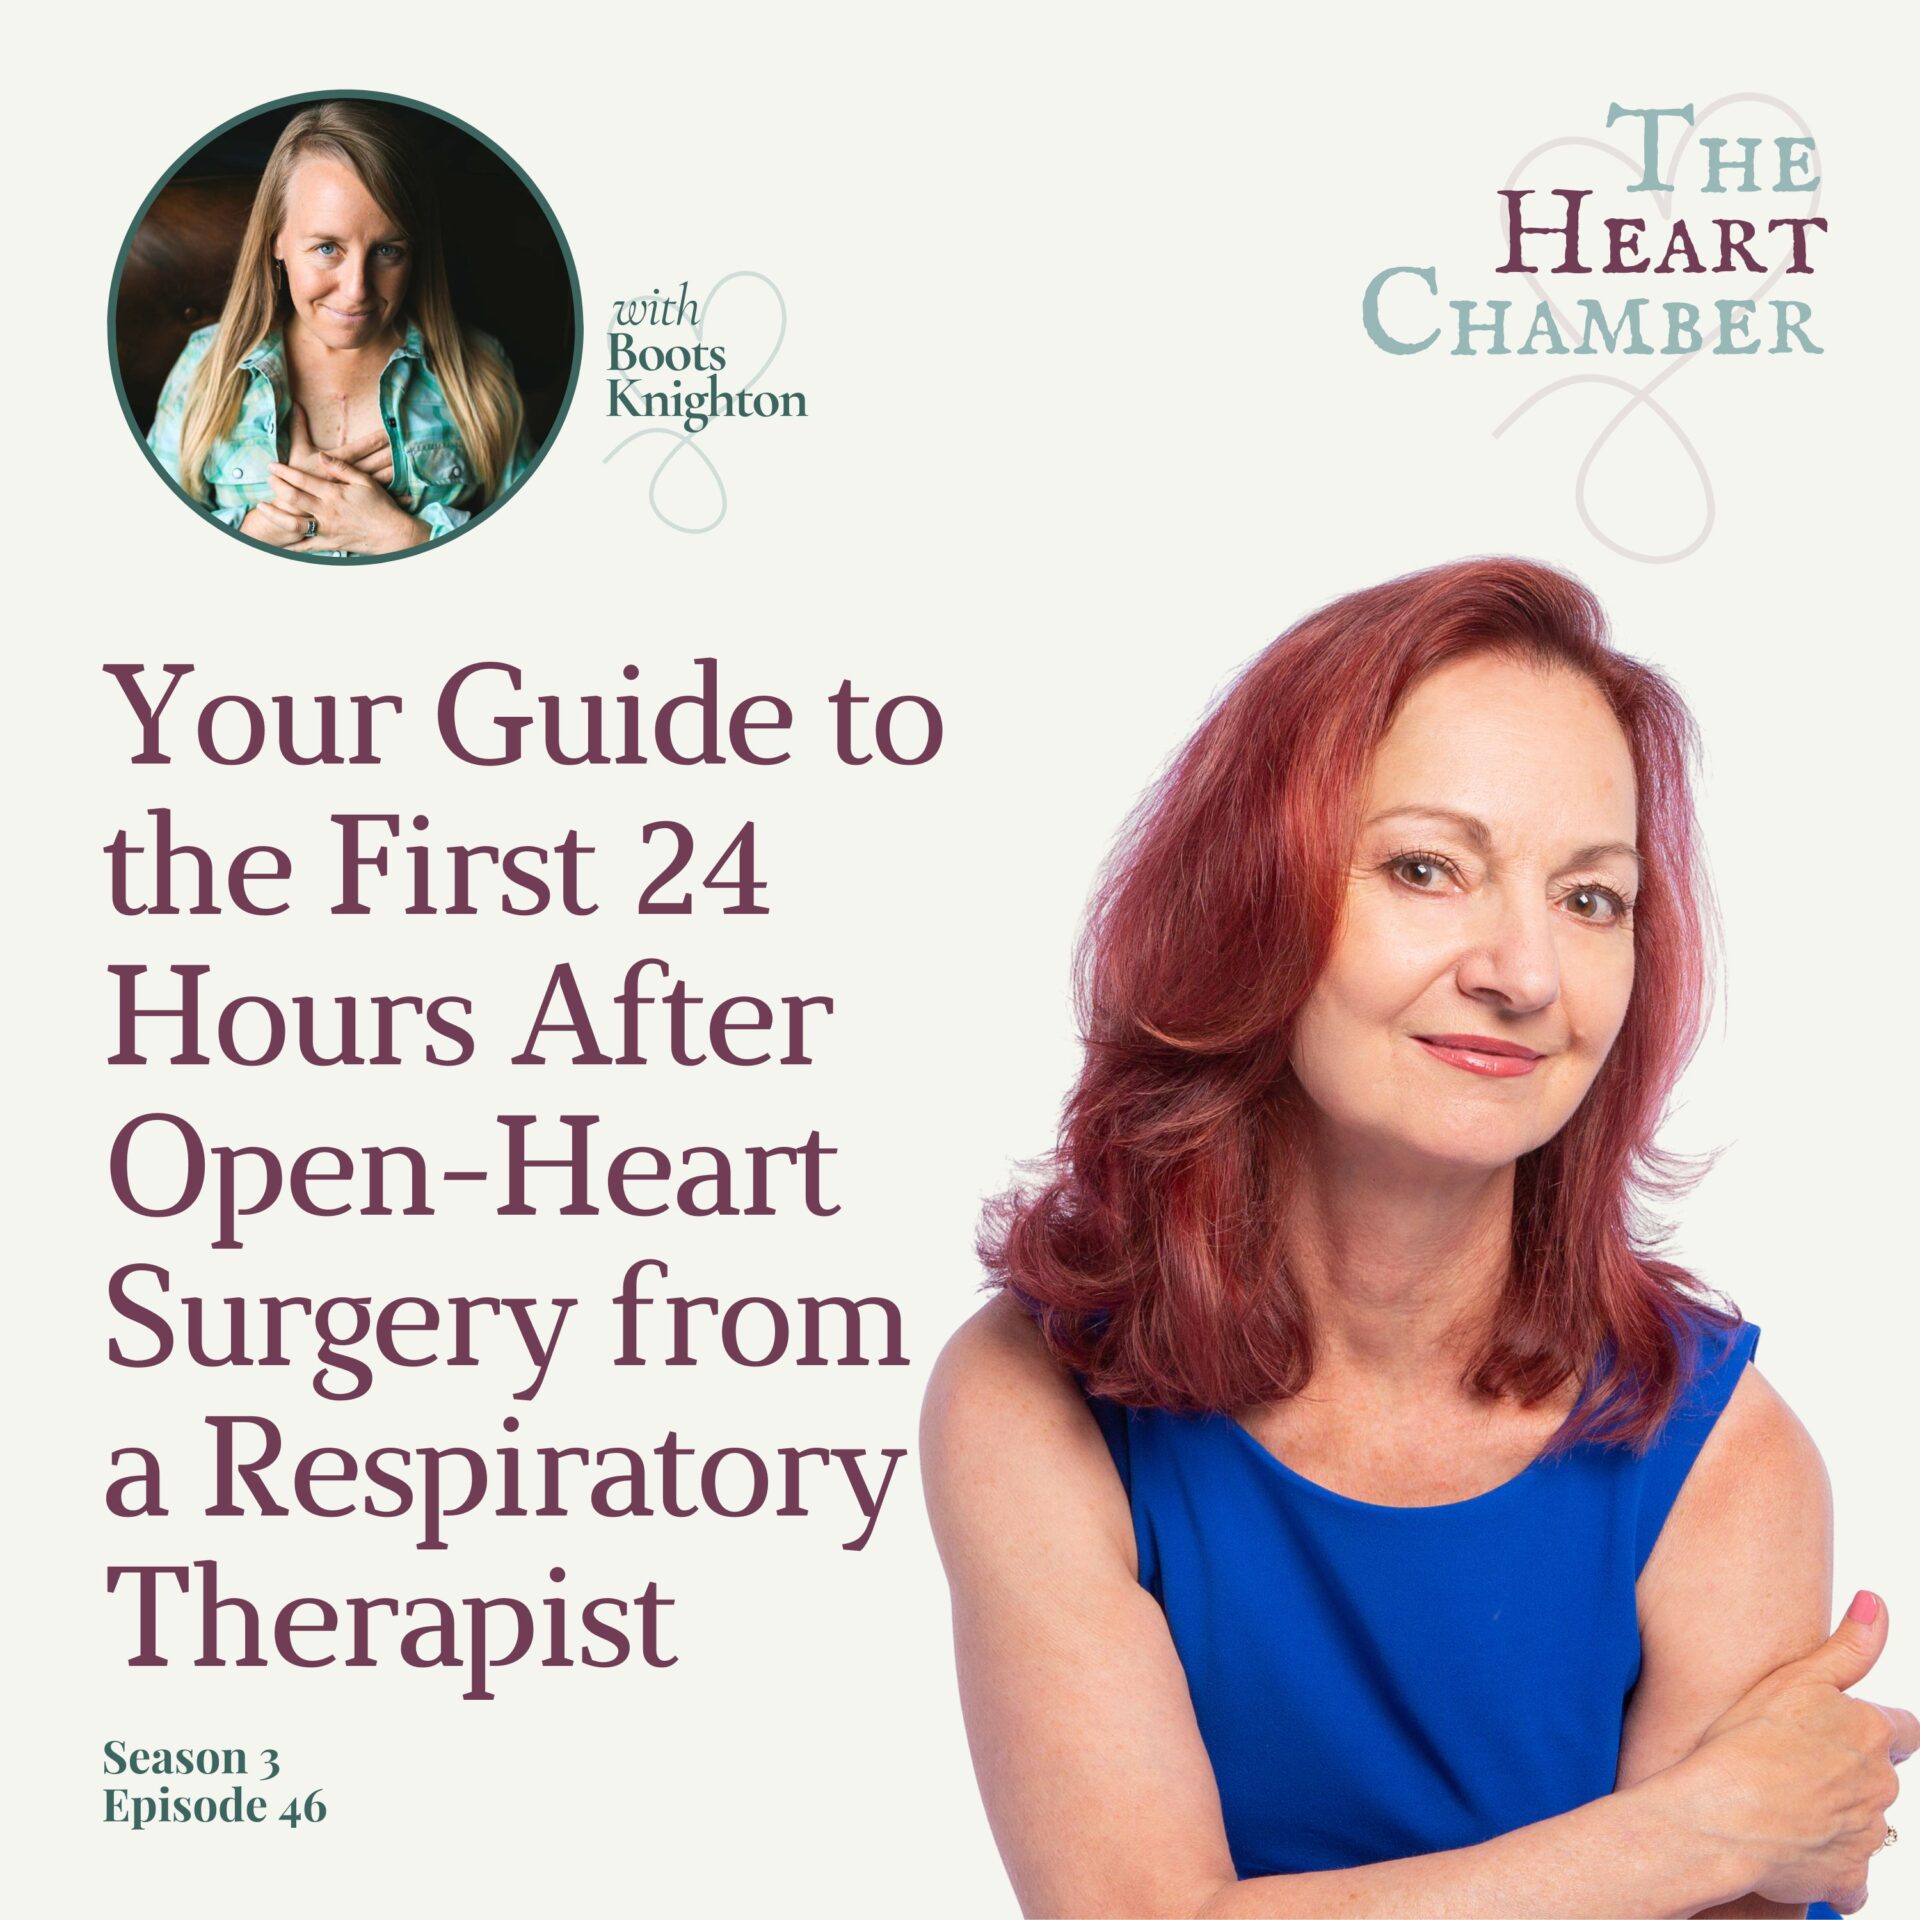 Your Guide to the First 24 Hours After Open-Heart Surgery from a Respiratory Therapist -46